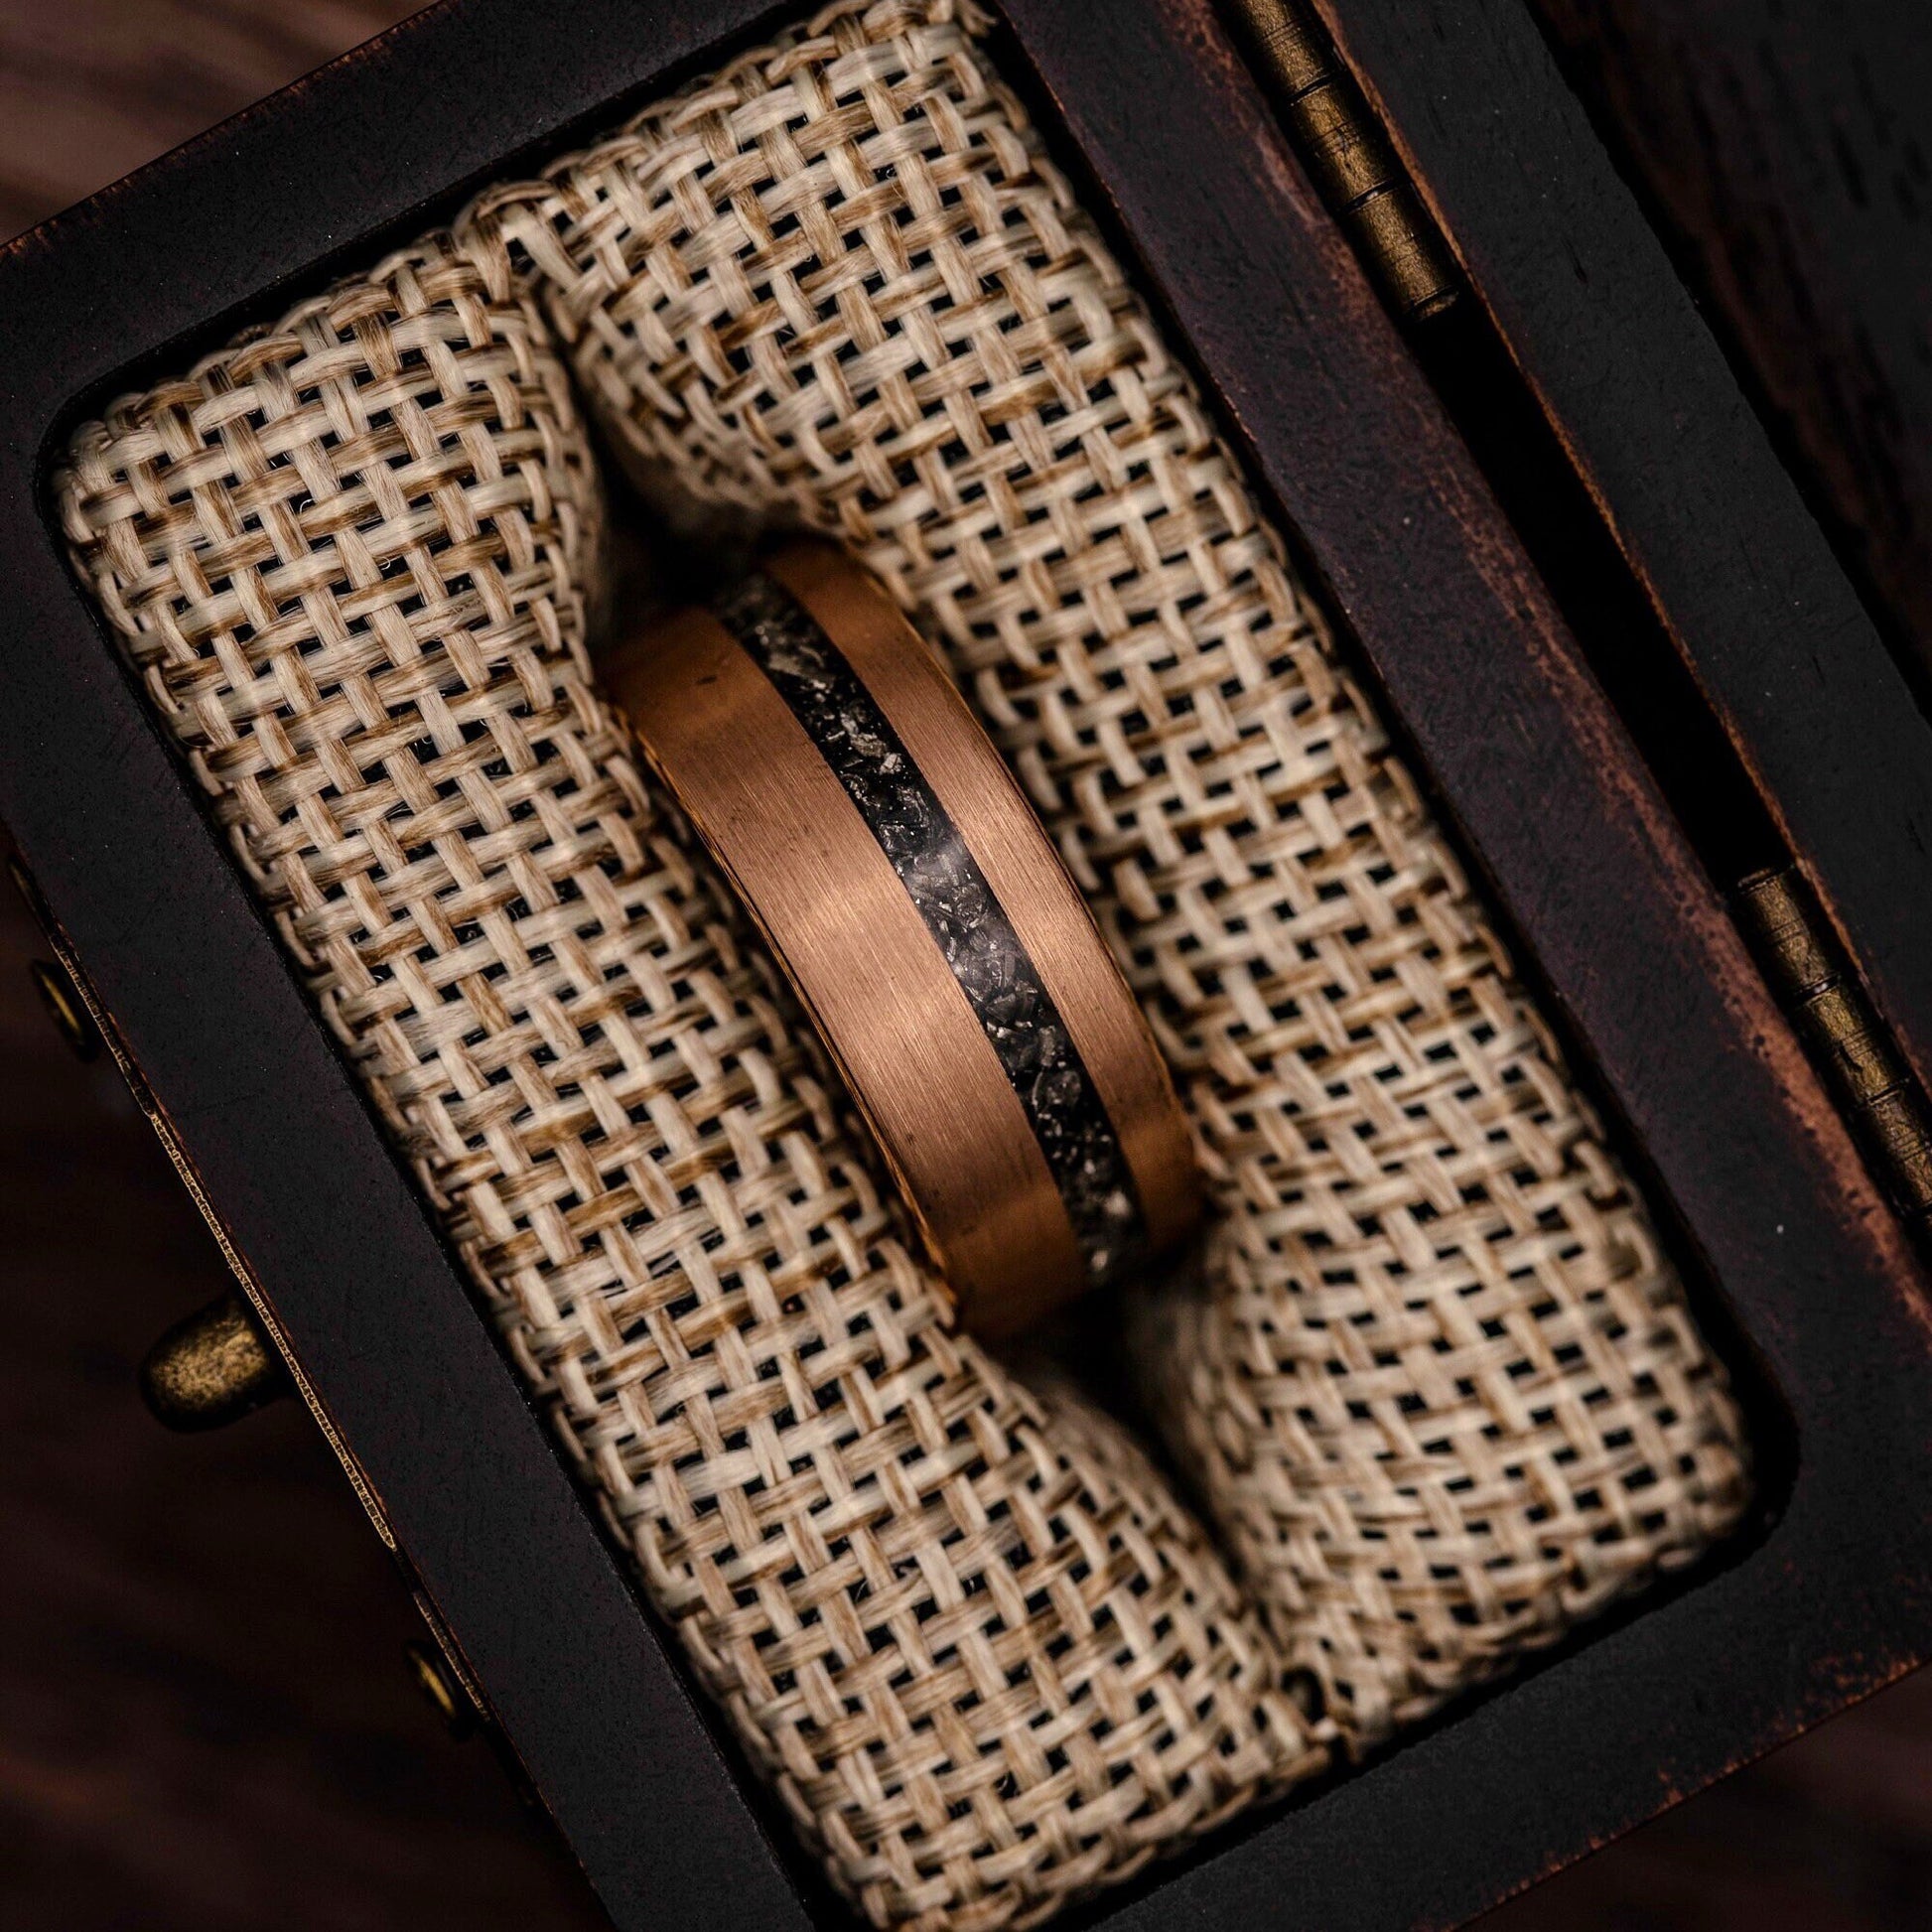 Handsome men's wedding band featuring real meteorite and rose gold construction.